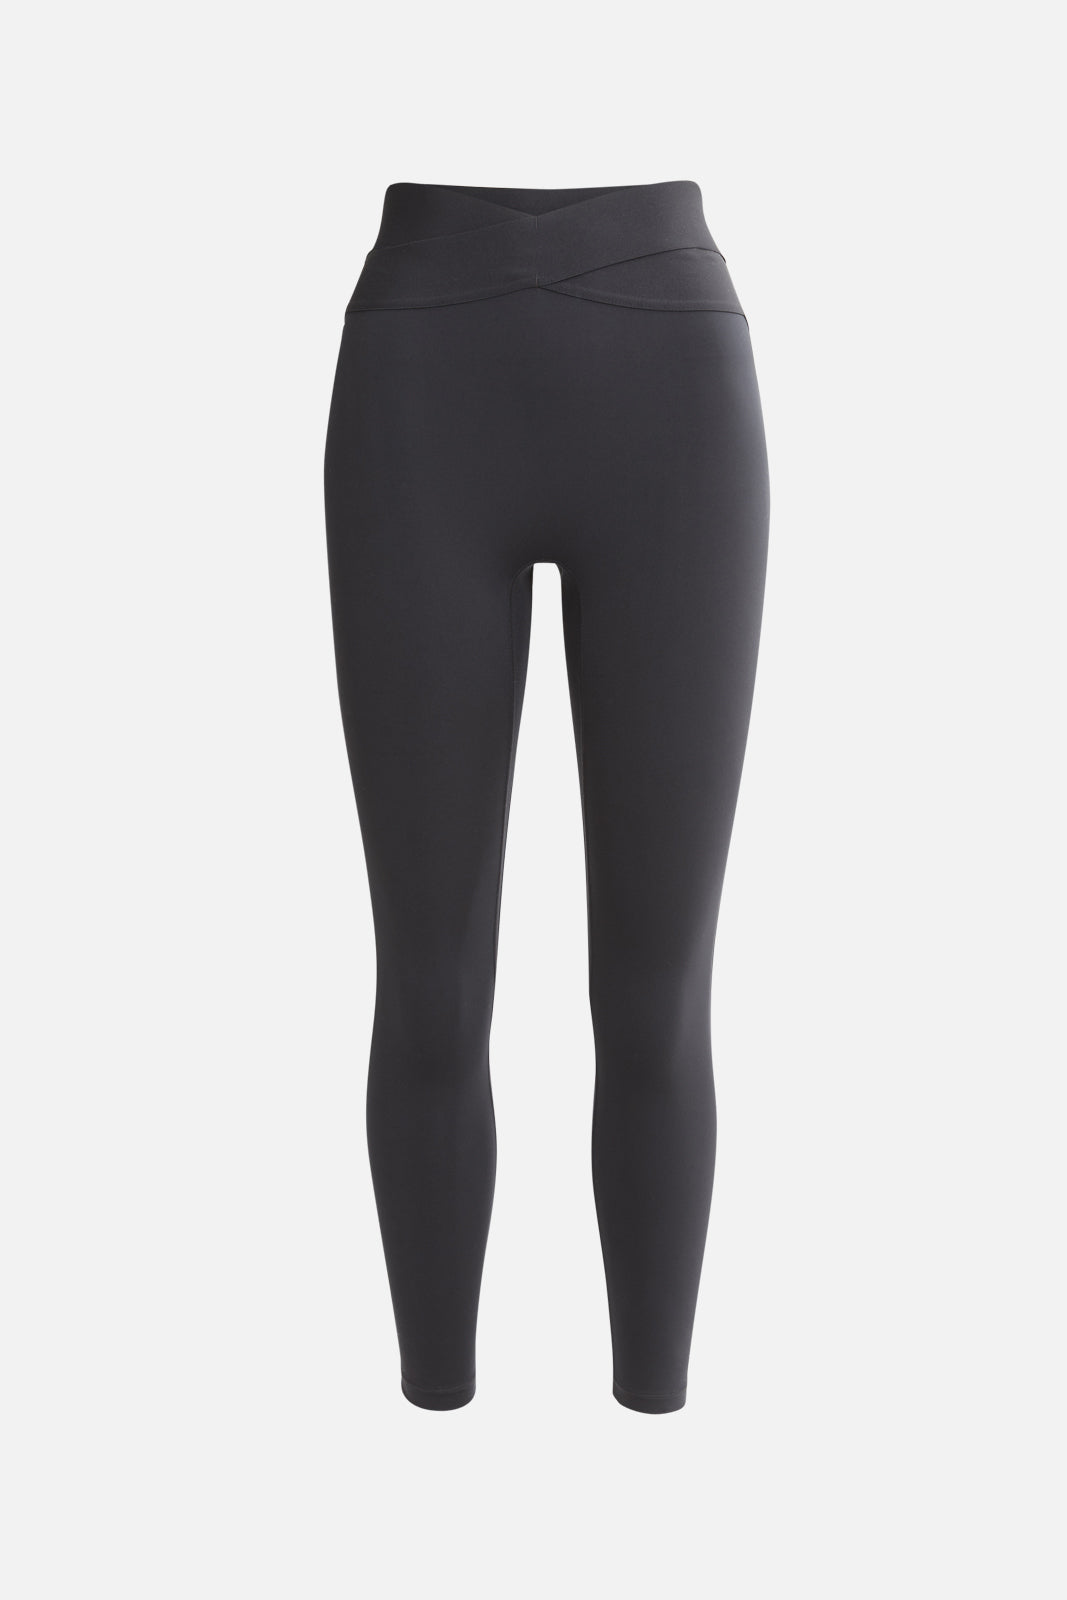 NEW YOUNG 3 Pack Crossover Leggings for Women  